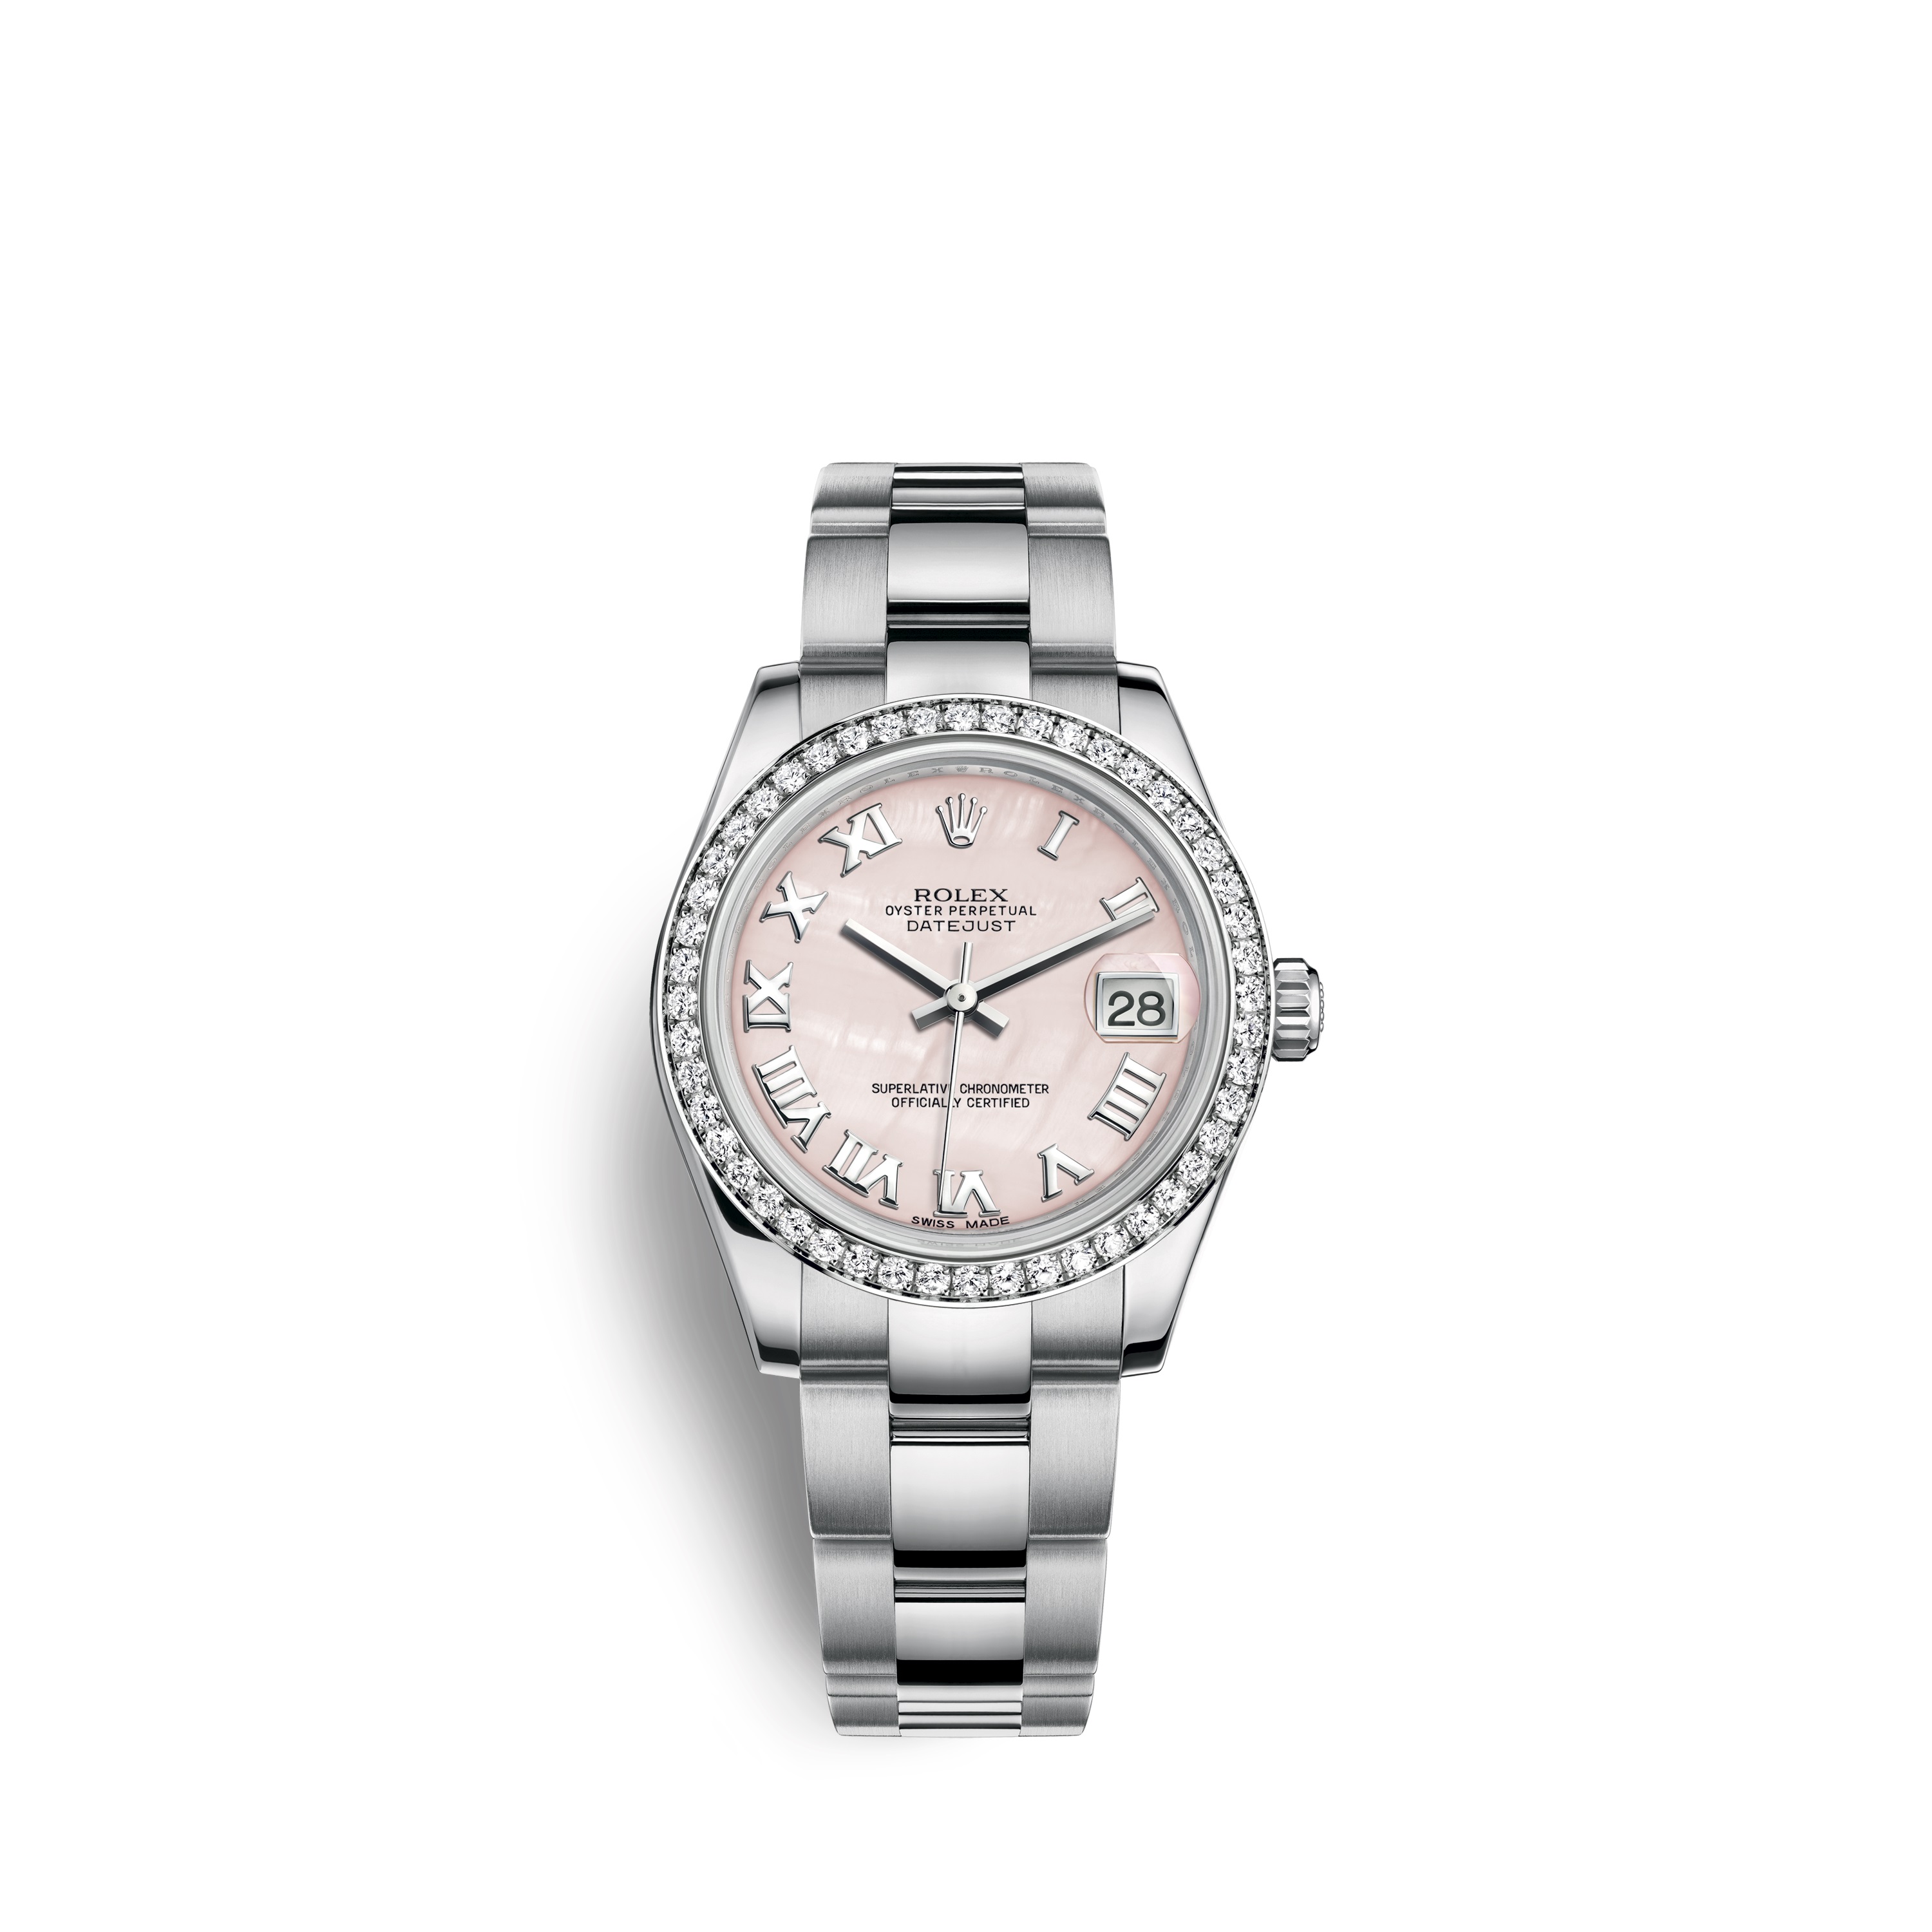 Datejust 31 178384 White Gold & Diamonds Watch (Pink Mother-of-Pearl)